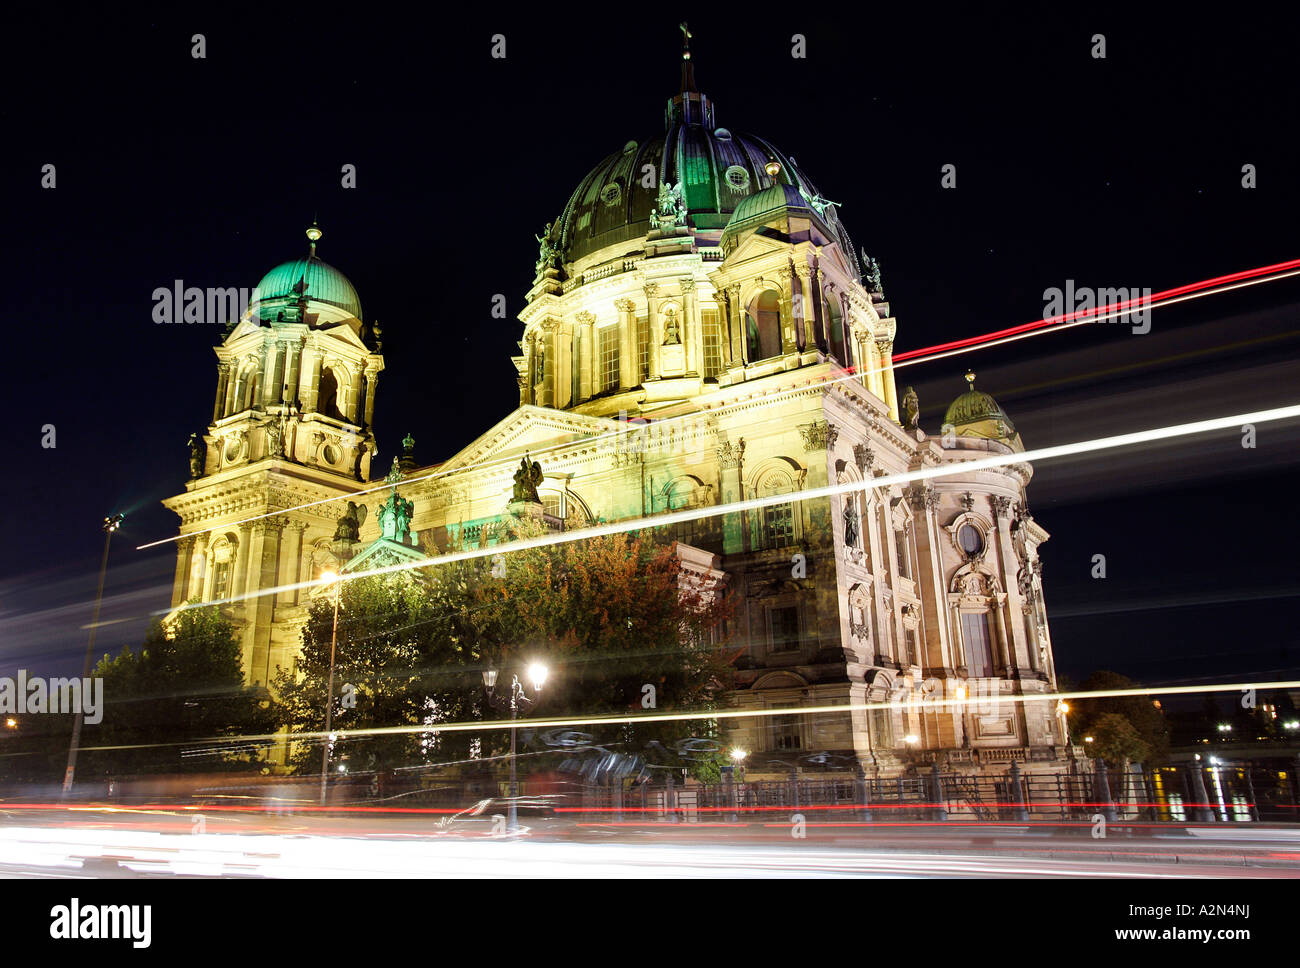 Church lit up at night, Berlin Cathedral, Museum Island, Berlin, Germany Stock Photo